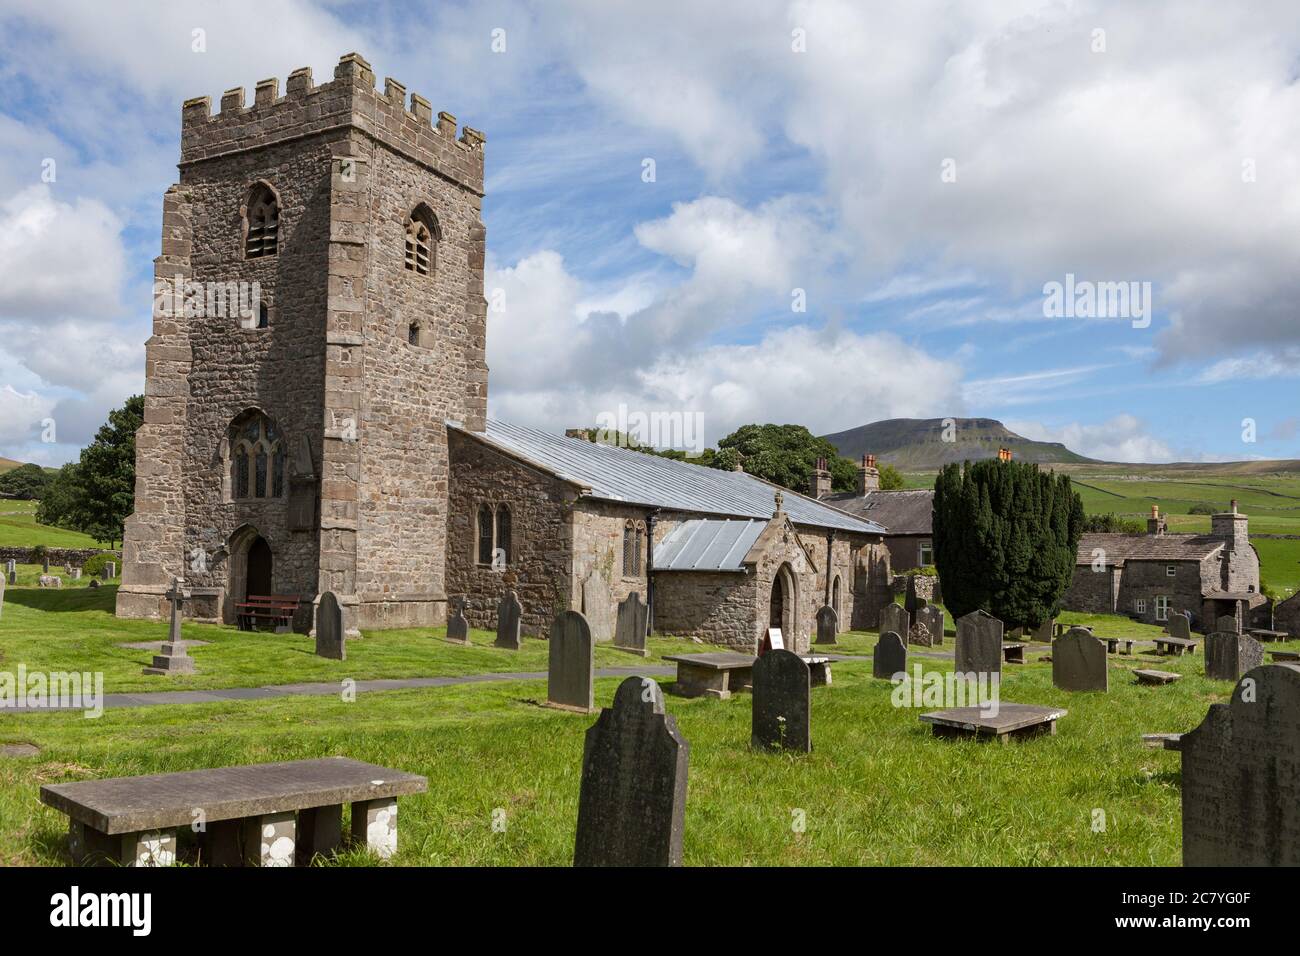 St. Oswald's parish church in the Yorkshire Dales village of Horton in Ribblesdale Stock Photo